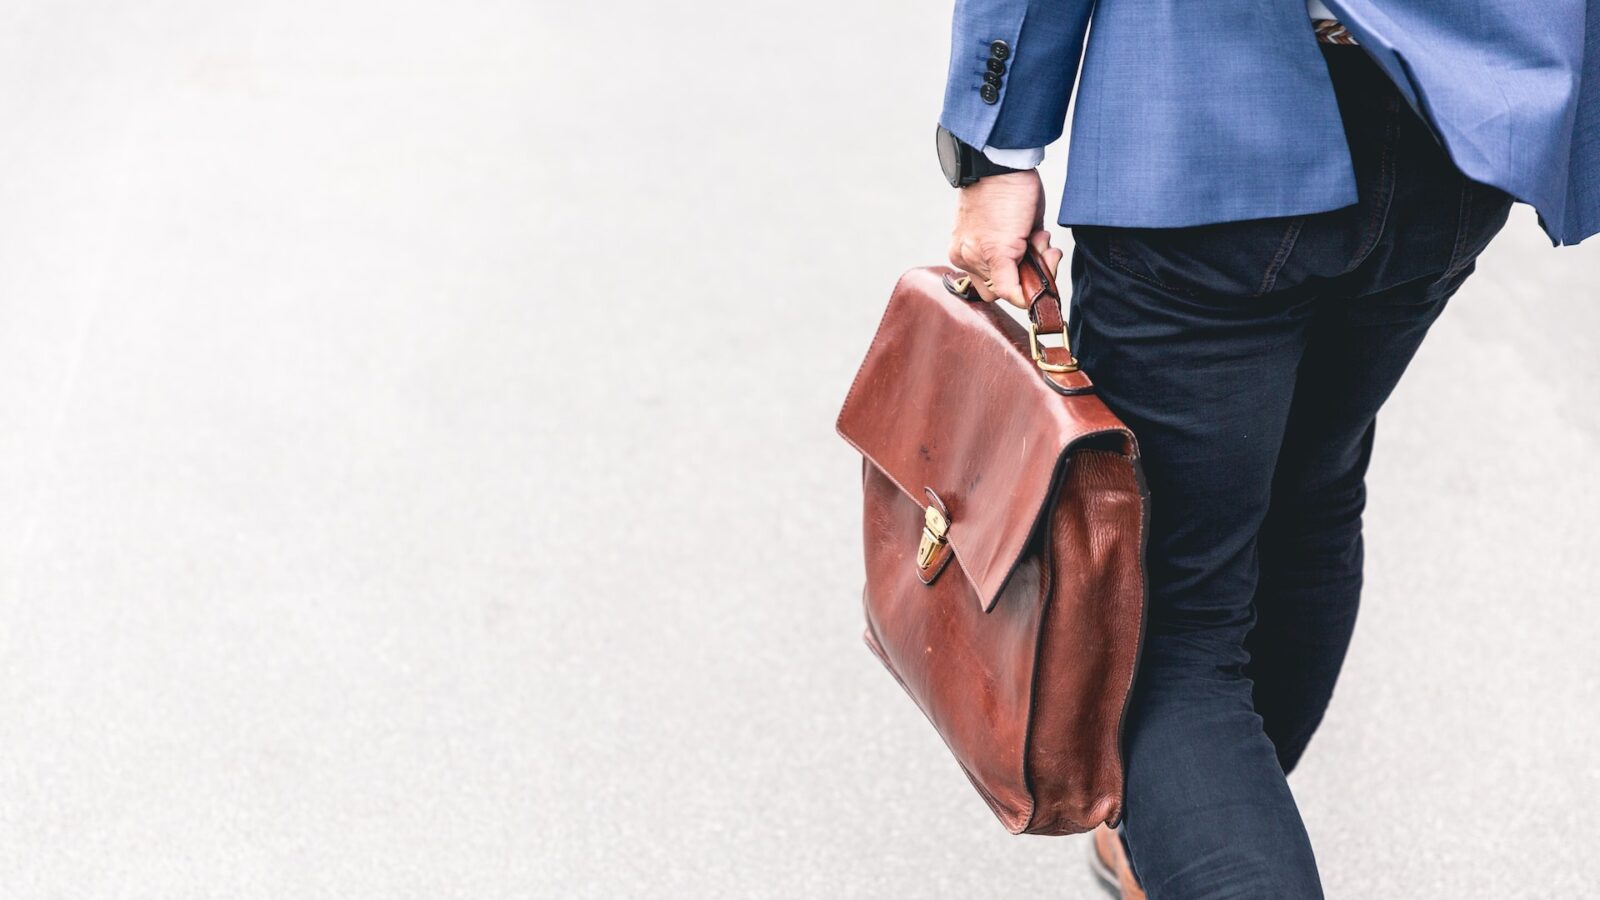 Man walking with briefcase following resignation or termination from employment